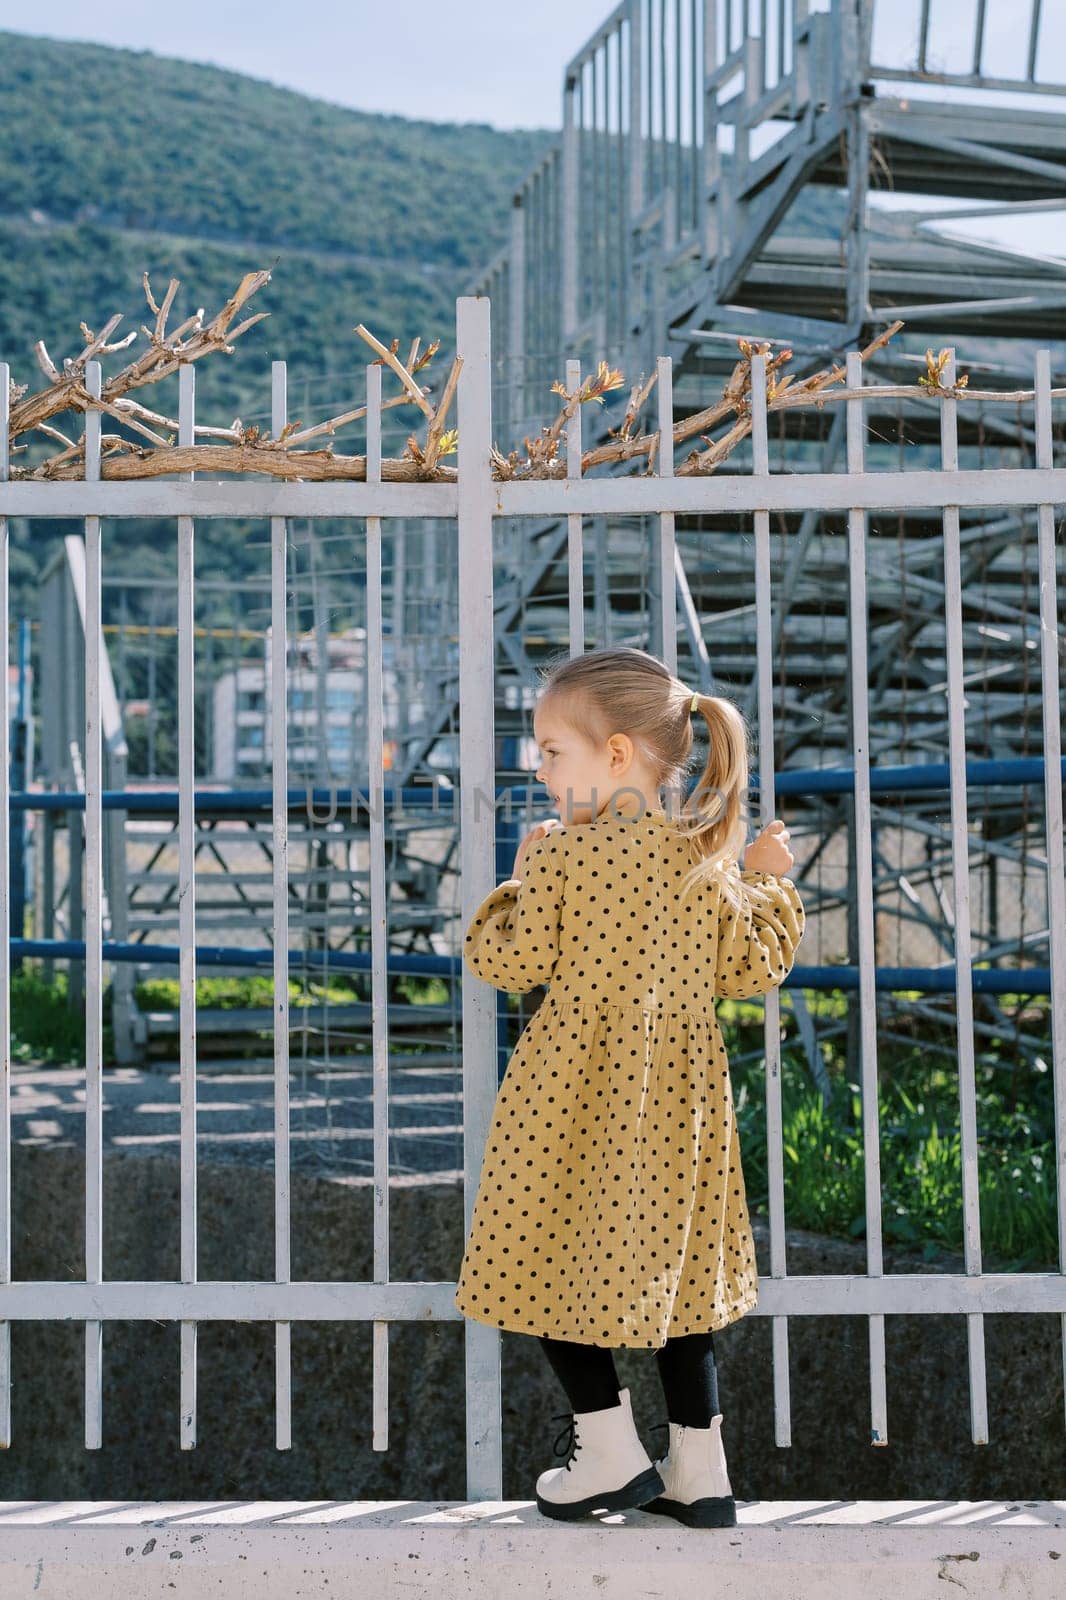 Little girl stands on the base of a metal fence, holding onto the bars and looking to the side. Back view by Nadtochiy